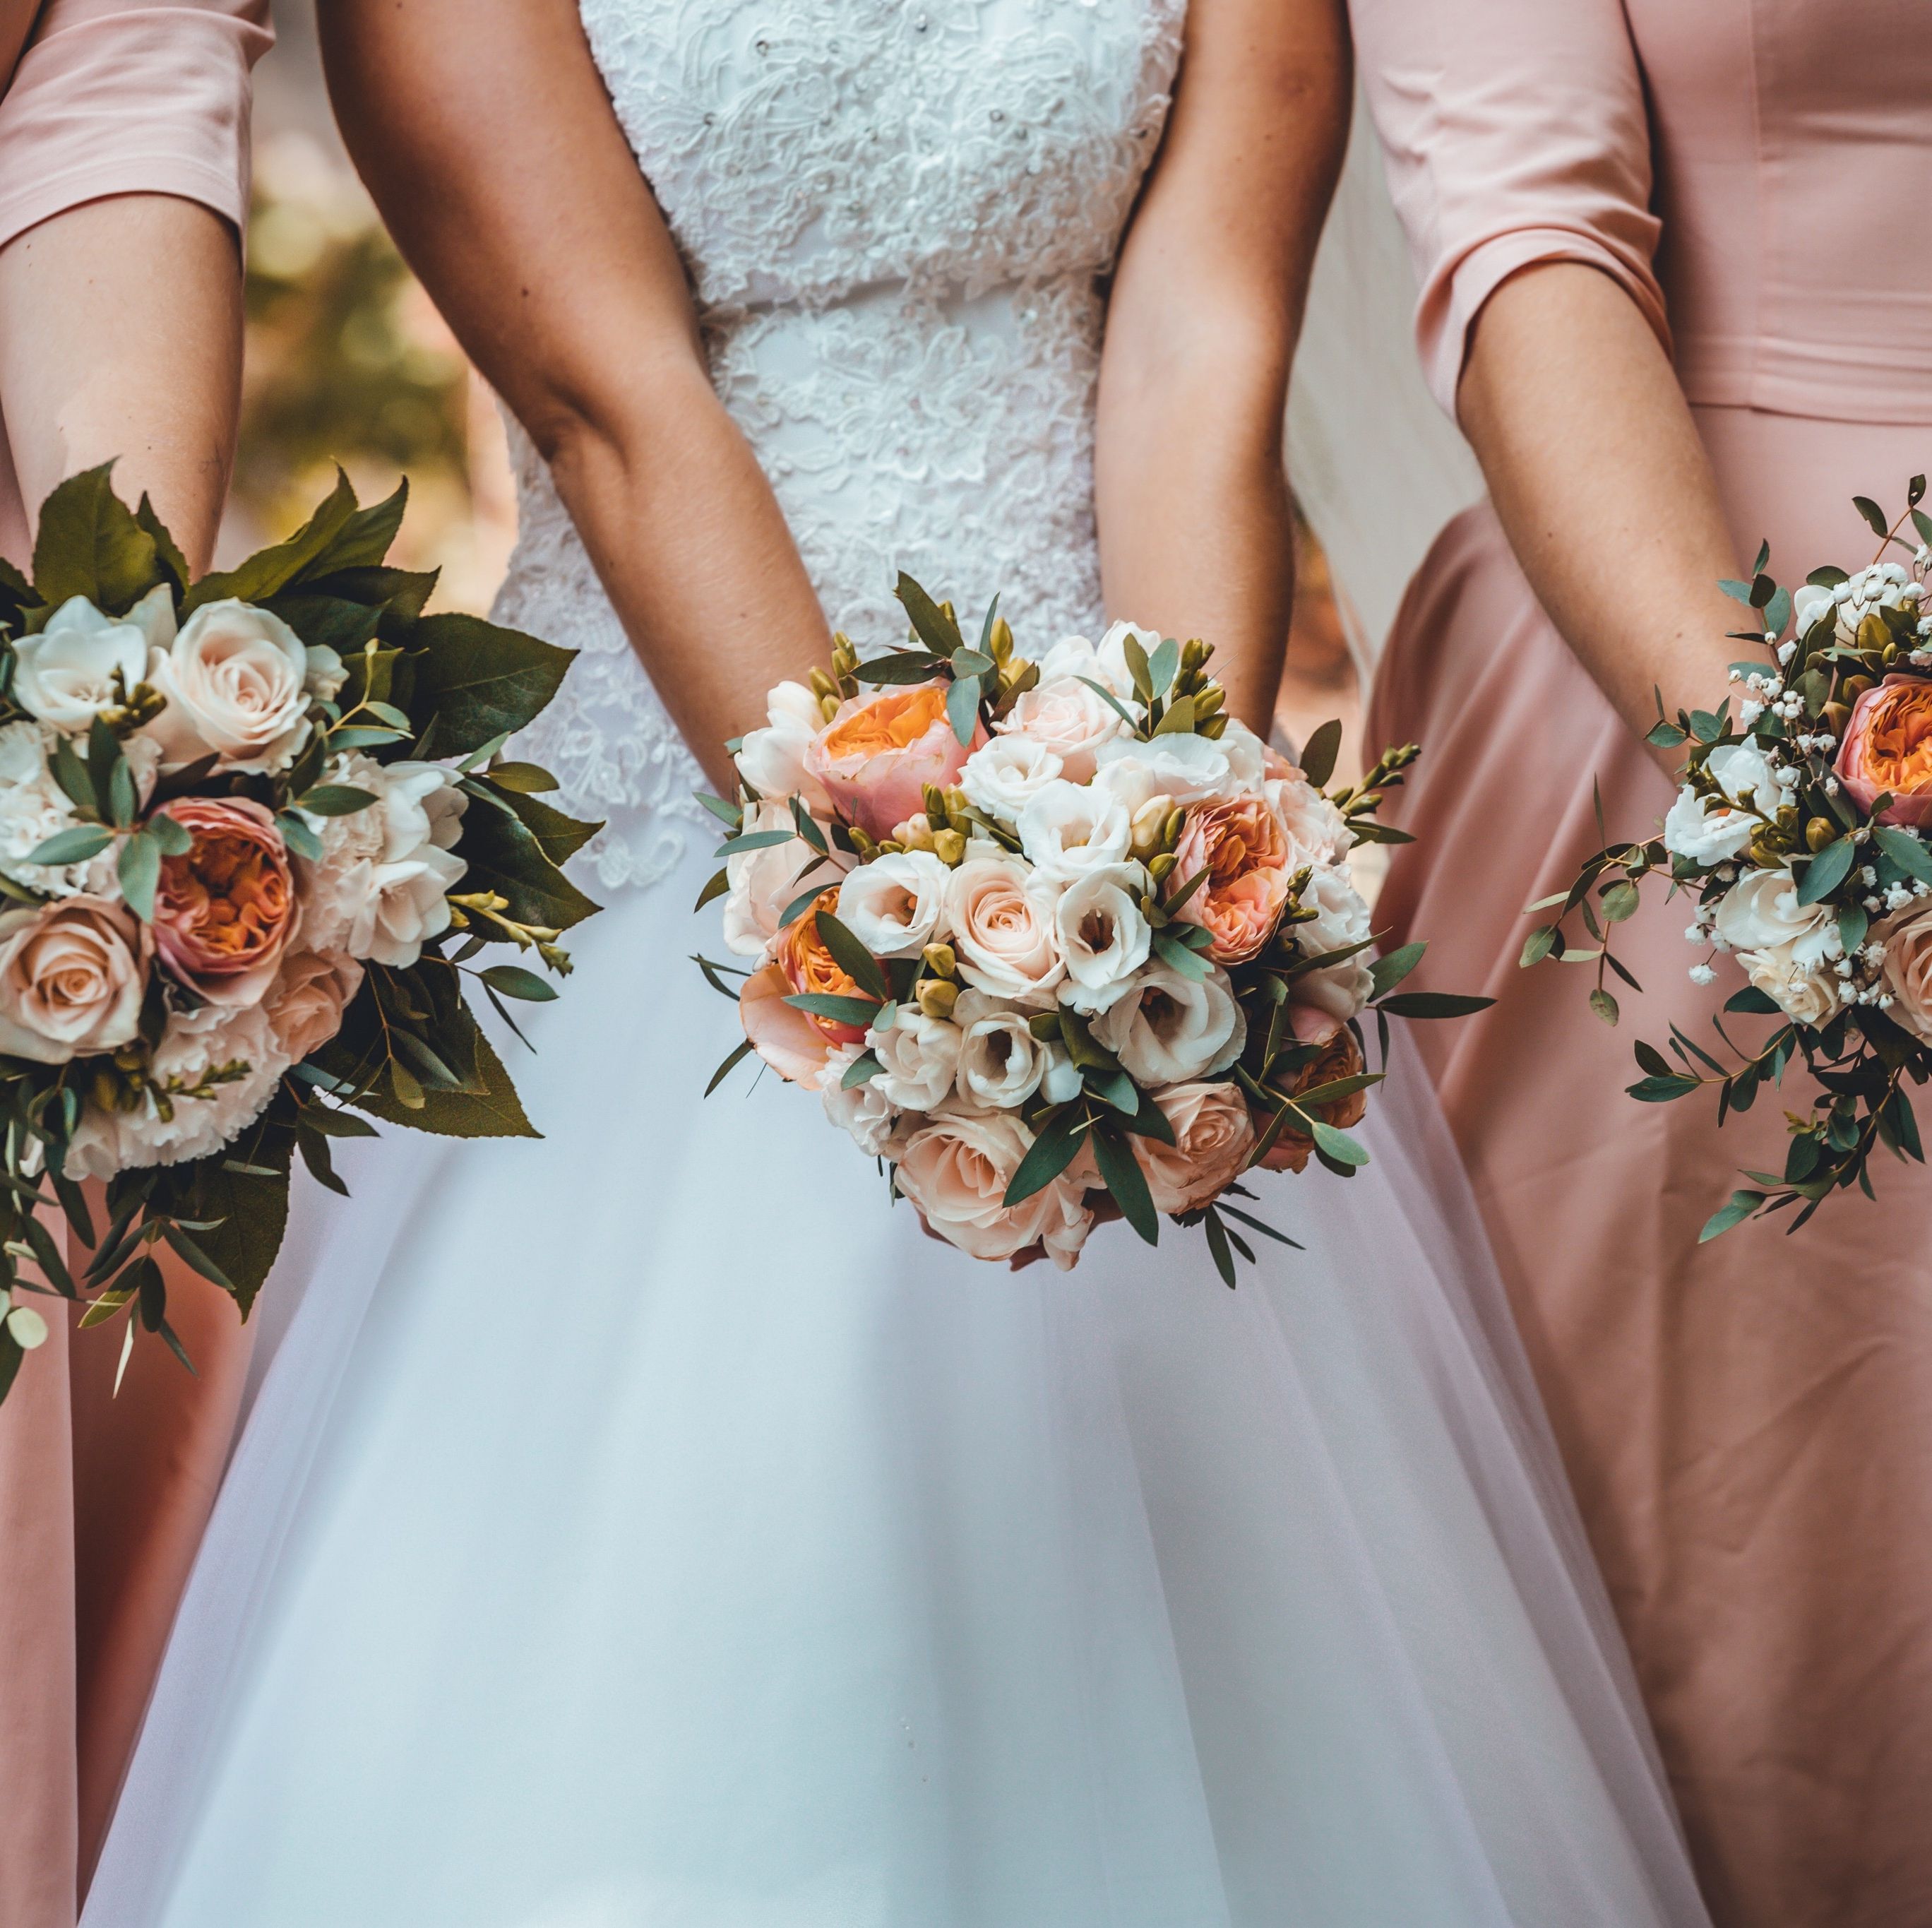 Violet Grey Just Released the Perfect Gifts for Brides and Bridesmaids